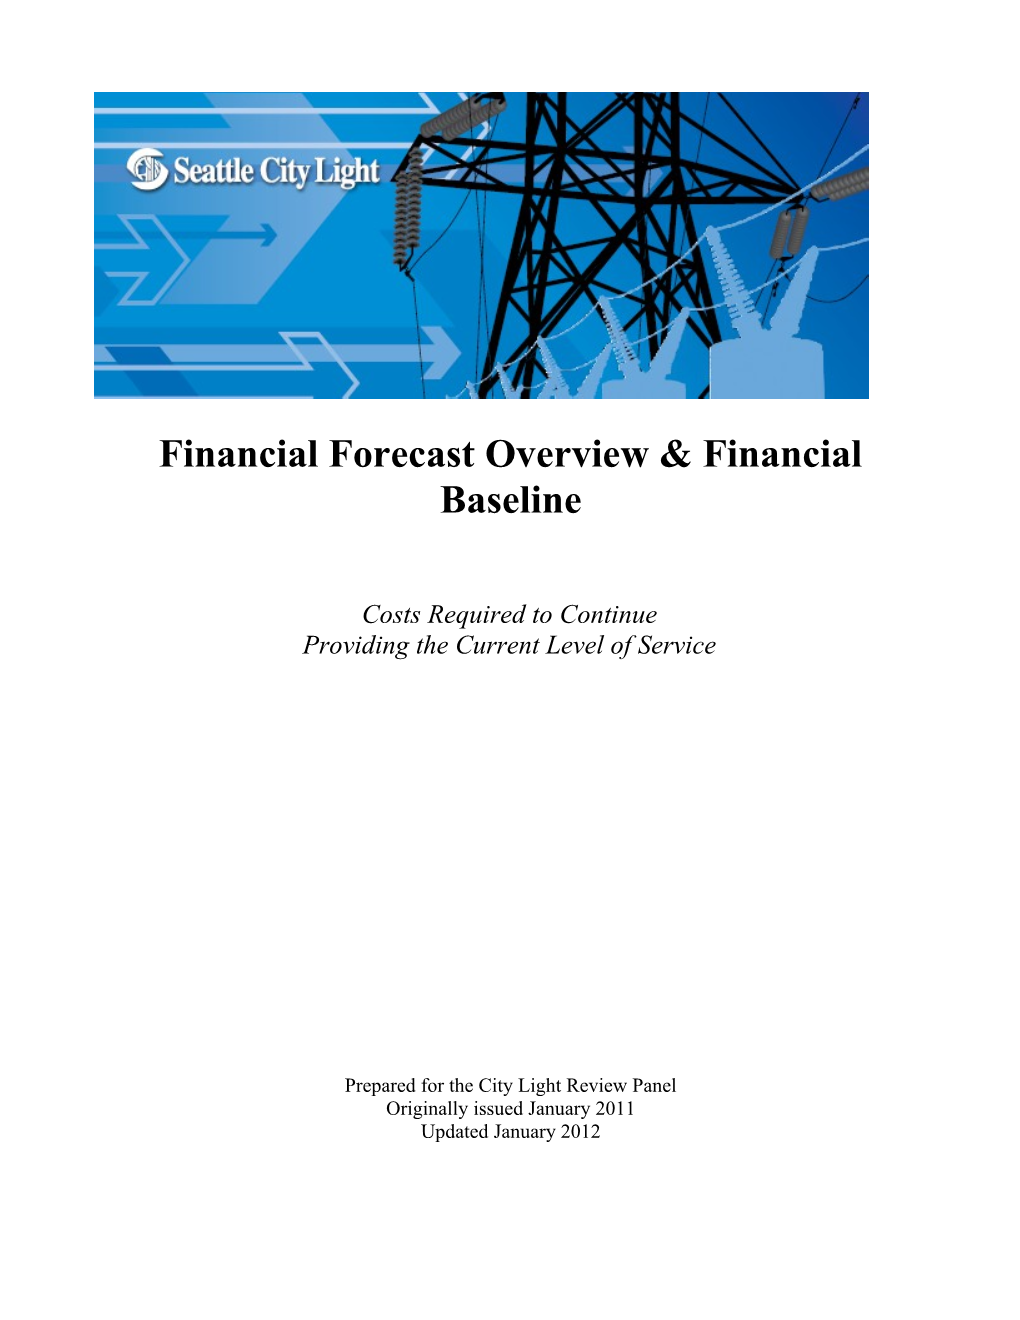 Financial Forecast Overview and Financial Baseline